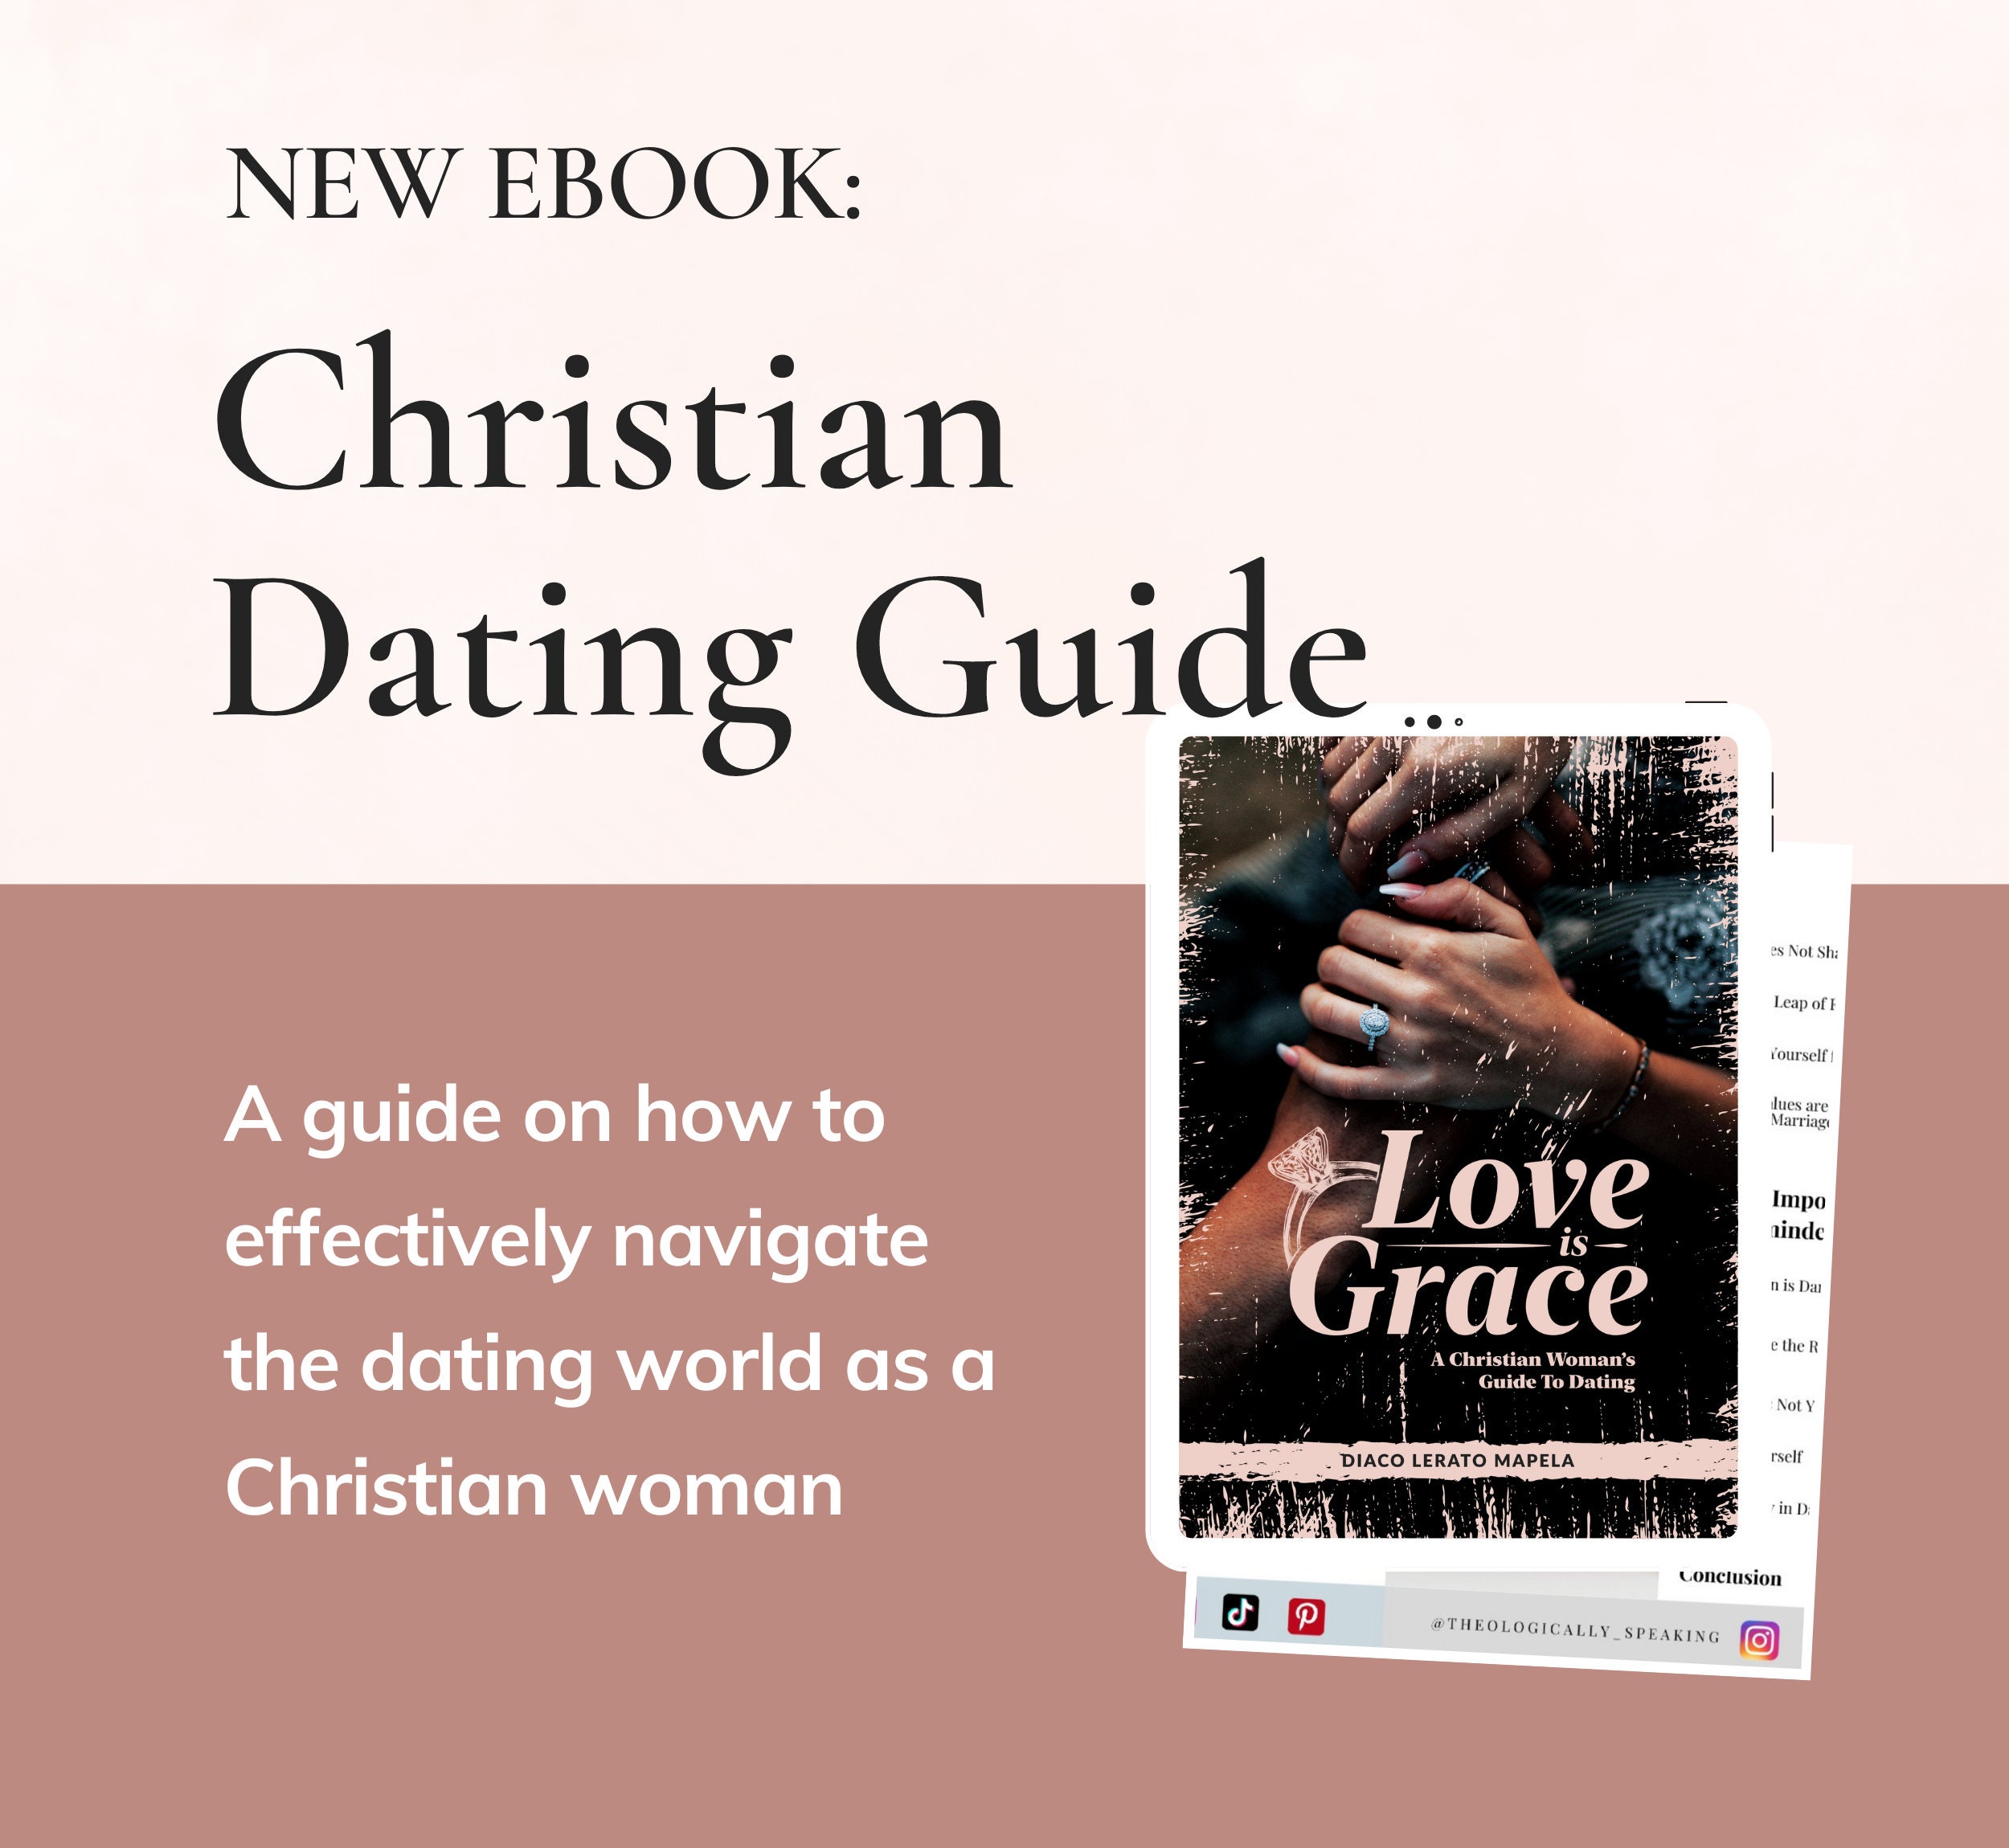 christian woman book dating and relationships